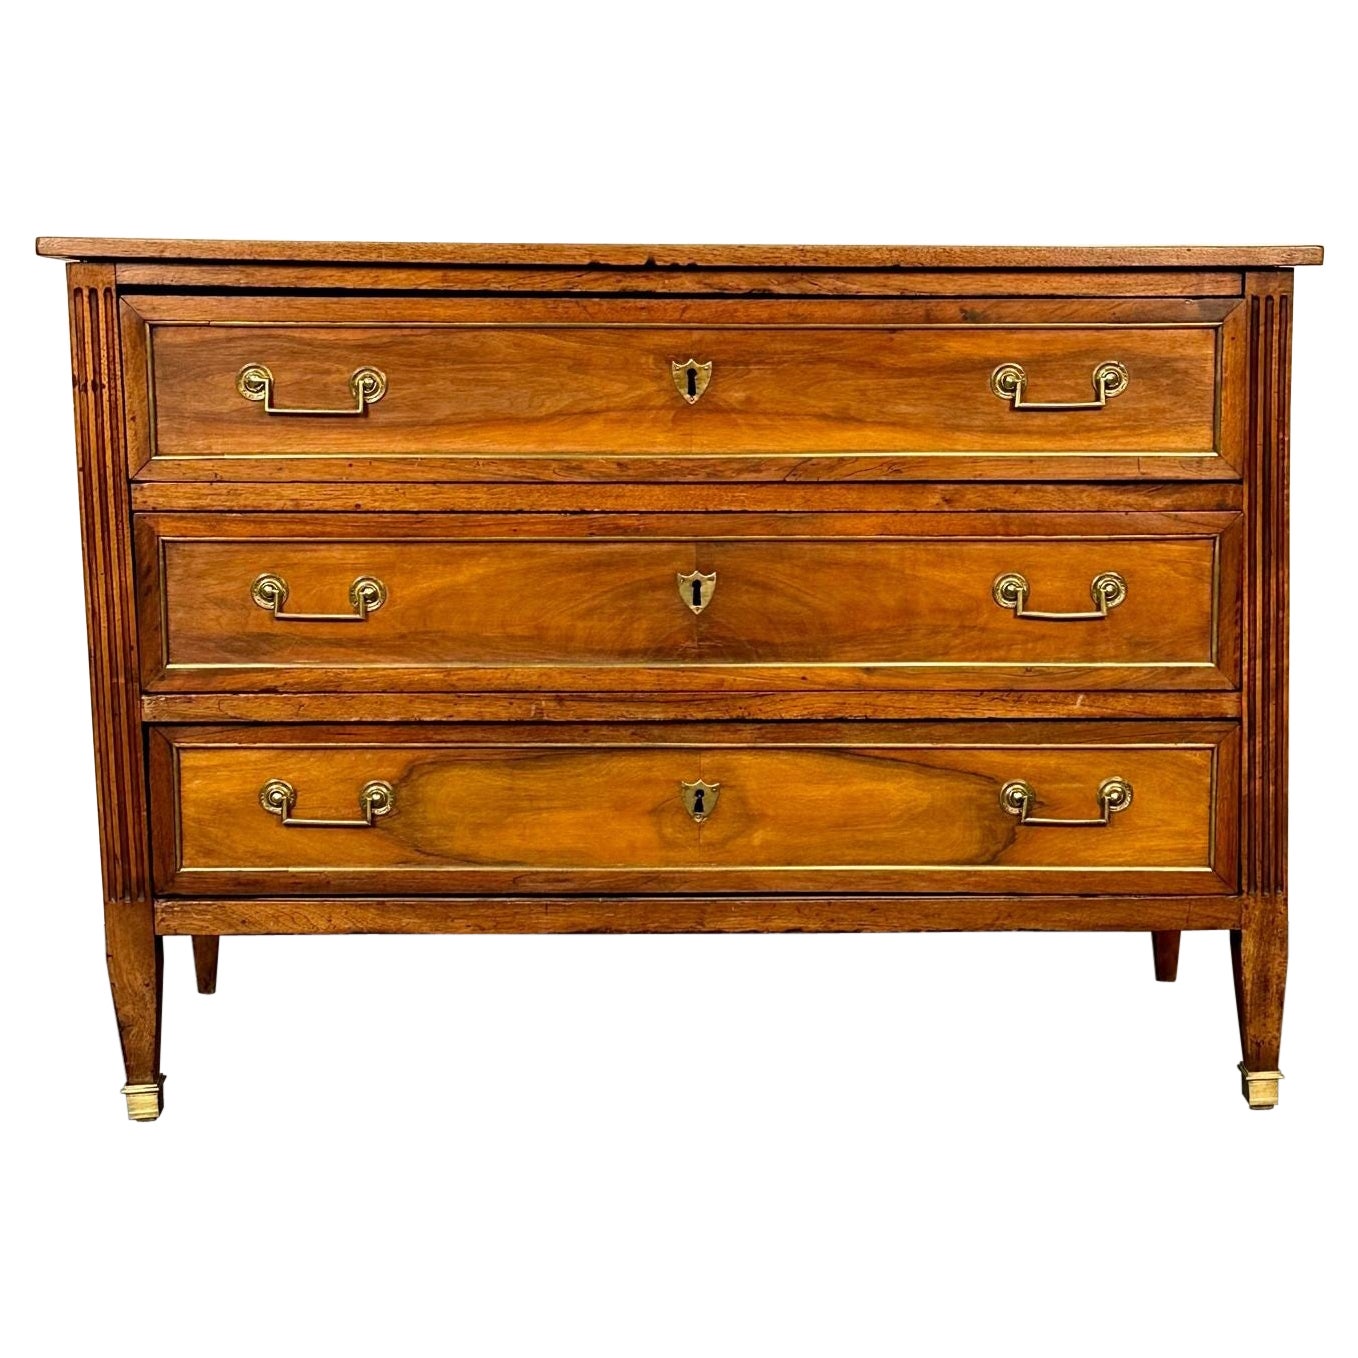 Period 18th Century French Louis XVI Mahogany Commode / Chest, Bronze Accent For Sale